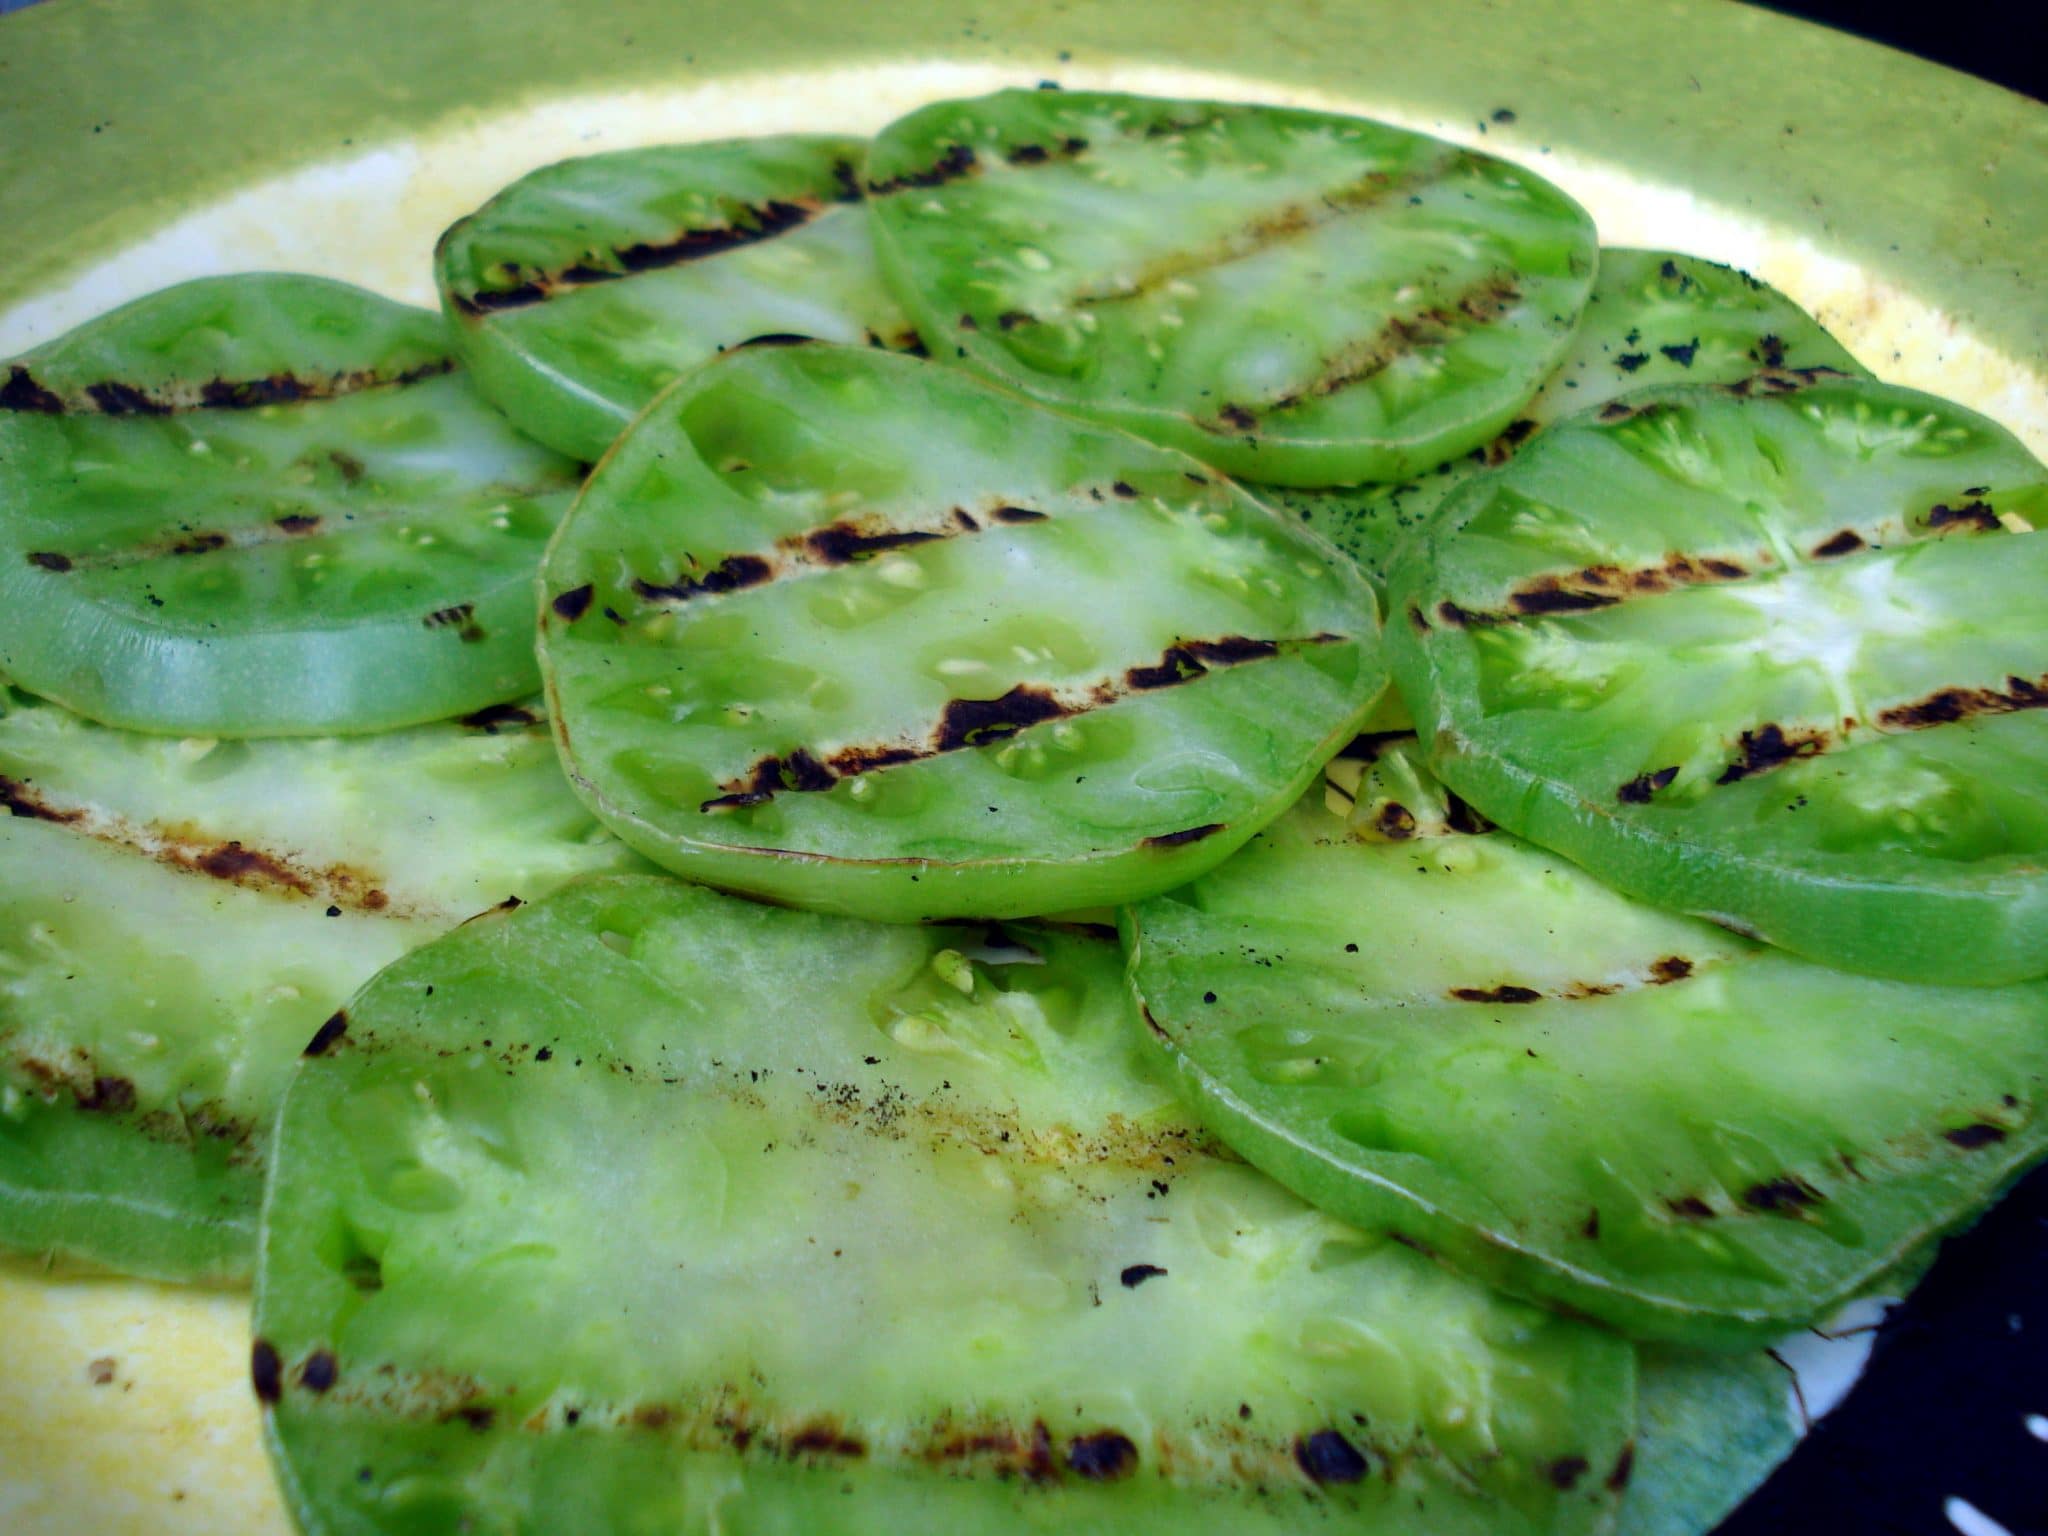 Grilled green tomatoes